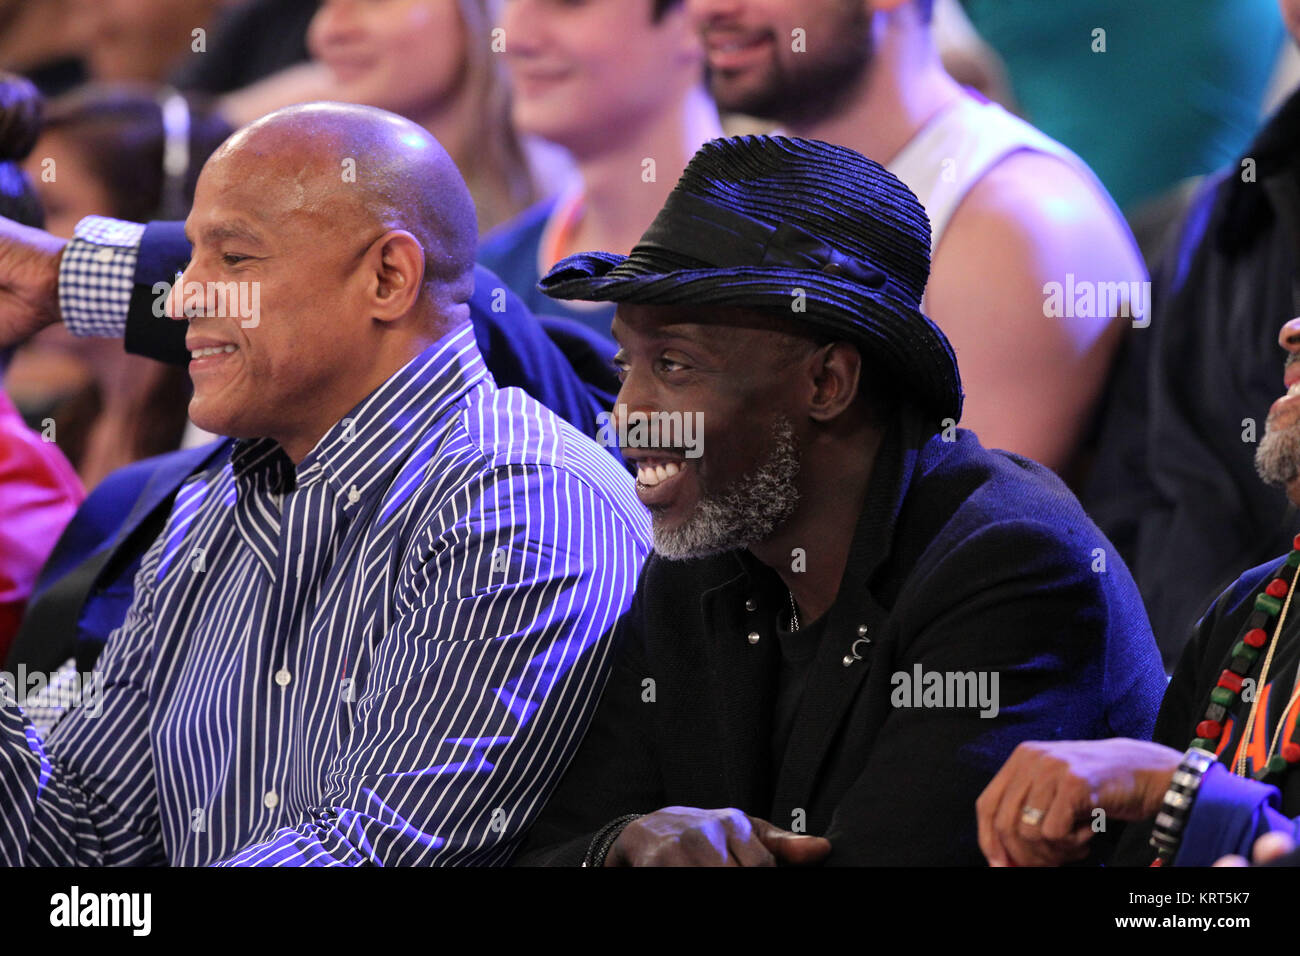 NEW YORK, NY - NOVEMBER 08: (Embargoed till November 10, 2015) Magic Johnson, Tracy Morgan with wife Megan Wollover sit with Michael K. Williams and  Director Spike Lee at the New York Knicks vs Los Angeles Lakers game at Madison Square Garden on November 8, 2015 in New York City.   People:  Michael K. Williams Stock Photo